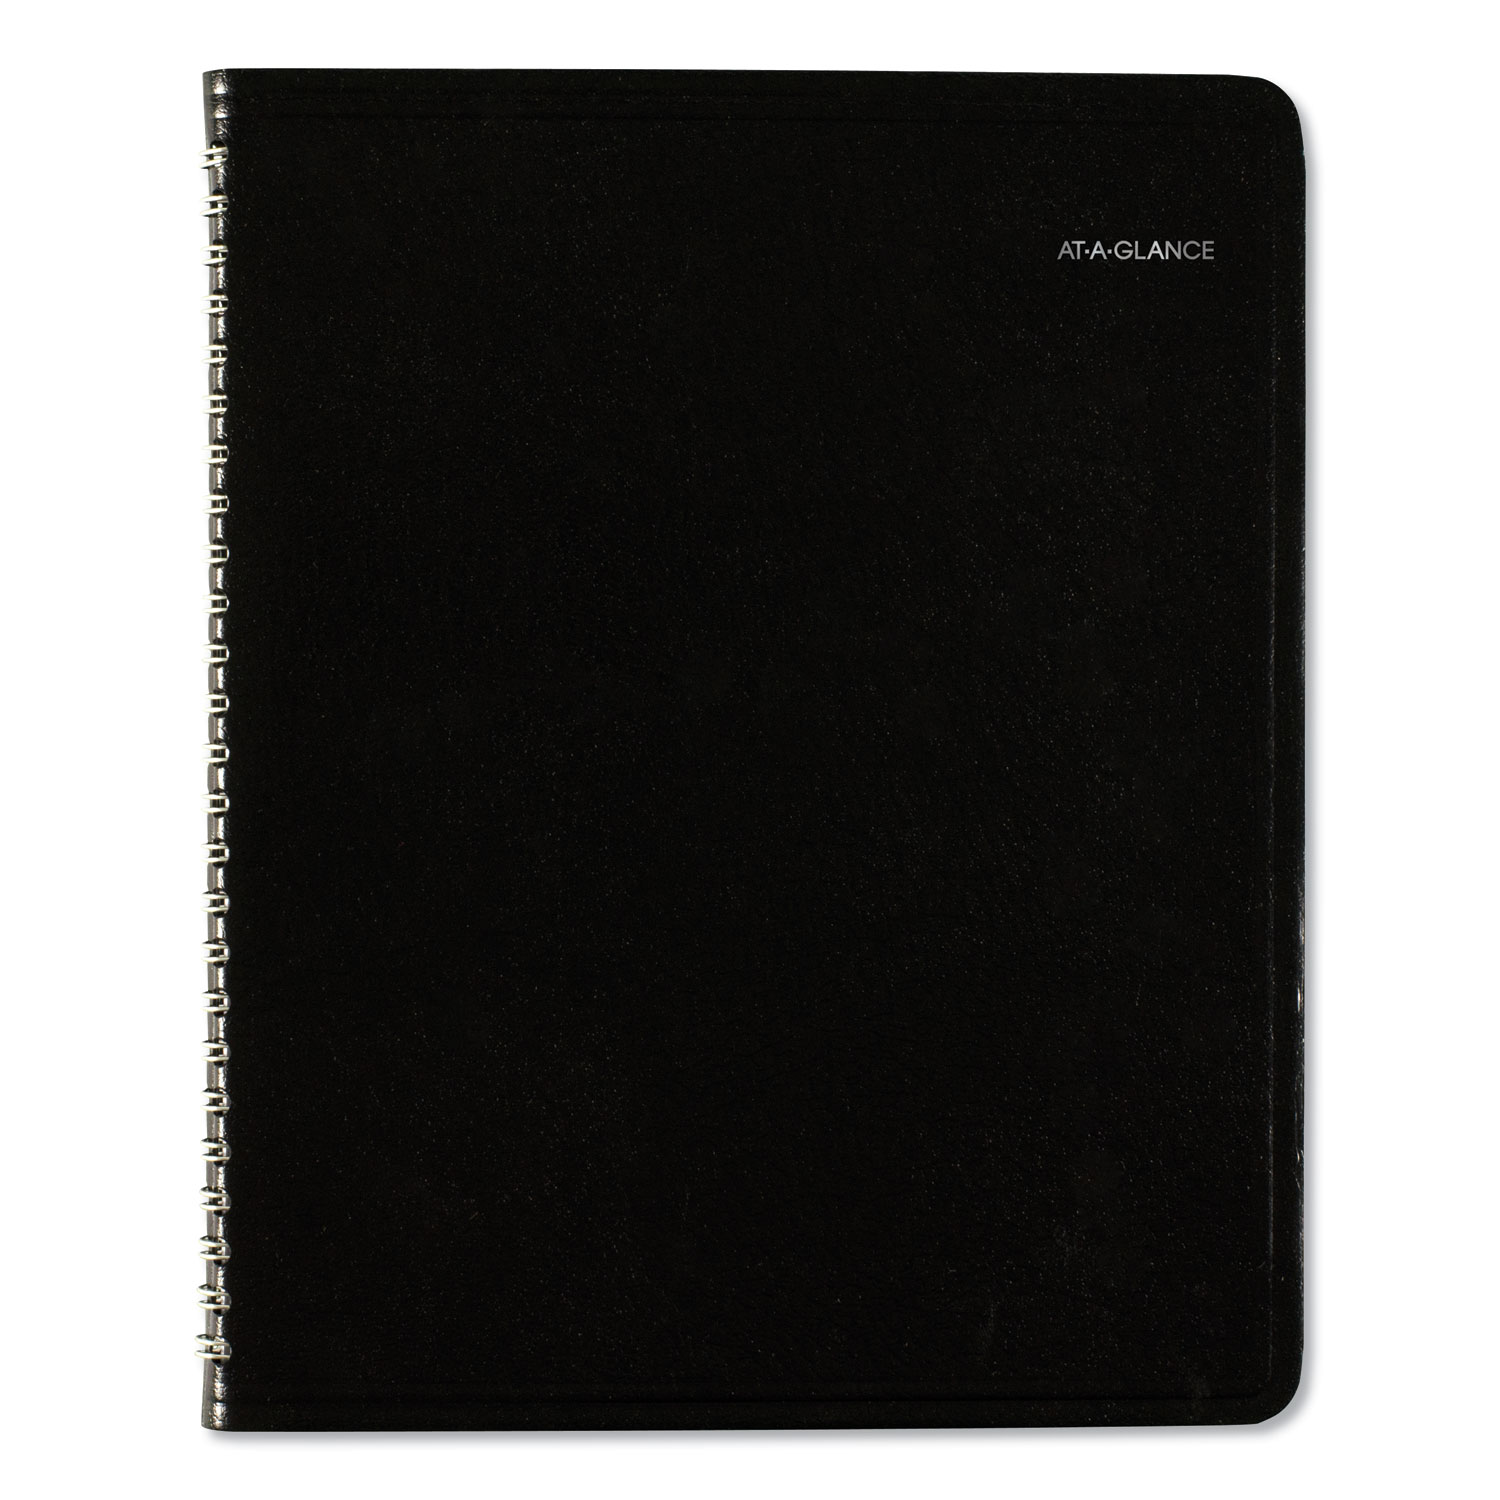  AT-A-GLANCE G590-00 Weekly Planner, 8 3/4 x 6 7/8, Black, 2020 (AAGG59000) 